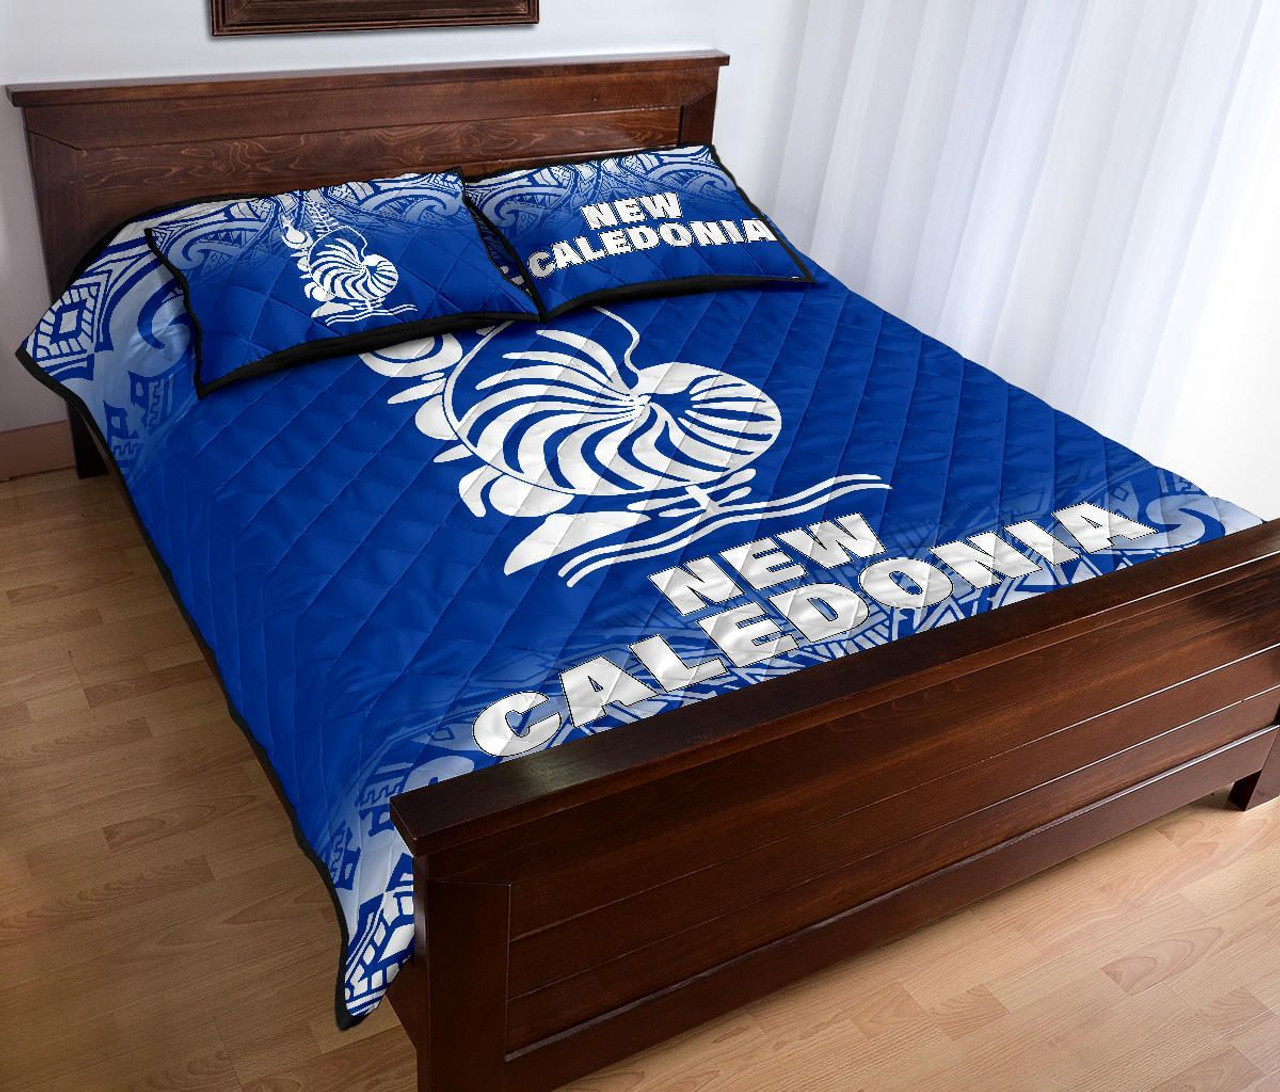 New Caledonia Quilt Bed Set - New Caledonia Coat Of Arms Polynesian Tattoo Blue Fog Style 4